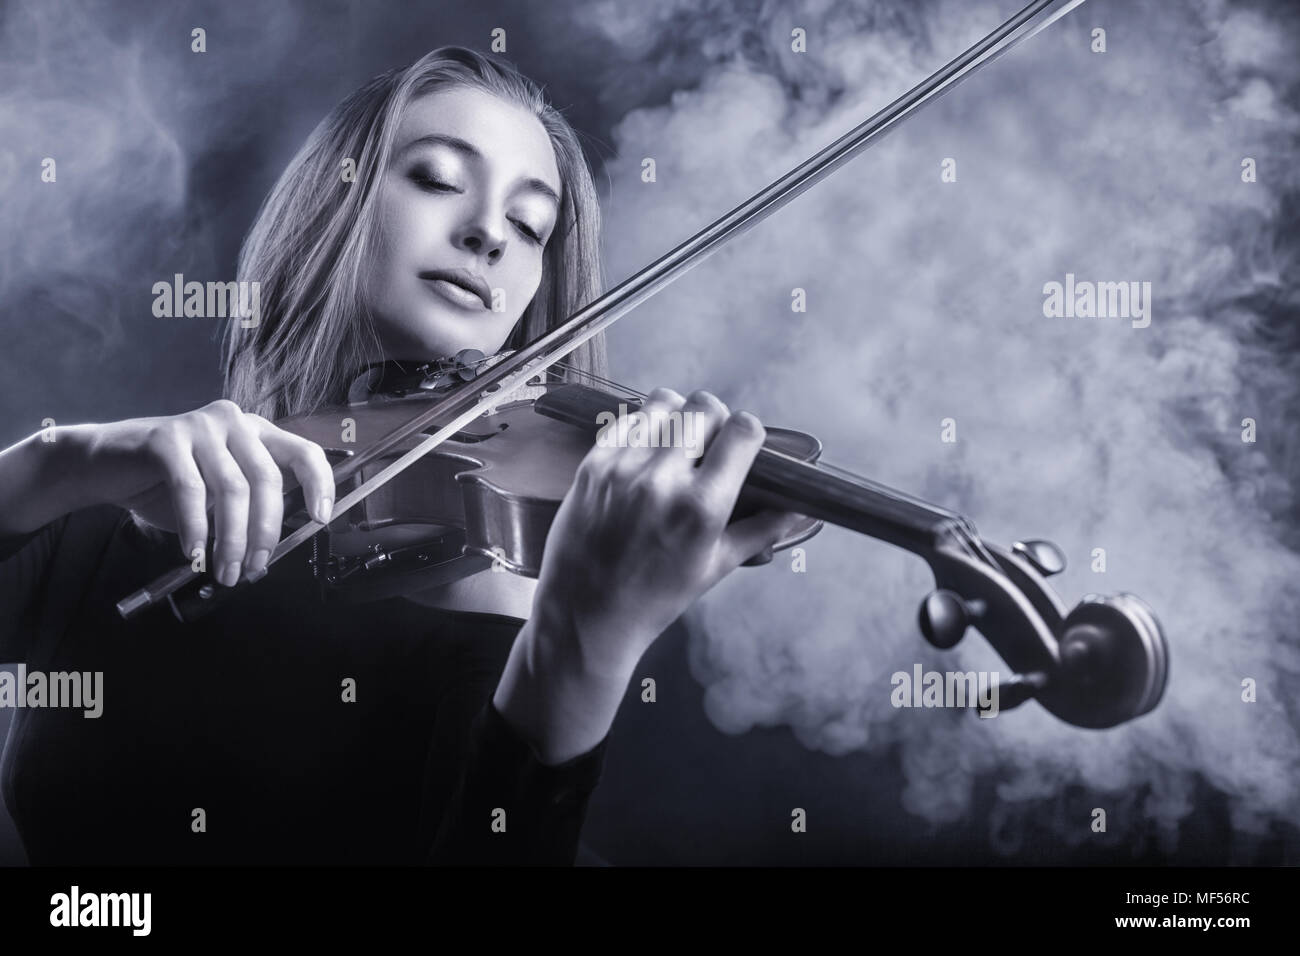 Black and white image. Beautiful young woman playing the violin. Fog in the background. Studio shot Stock Photo